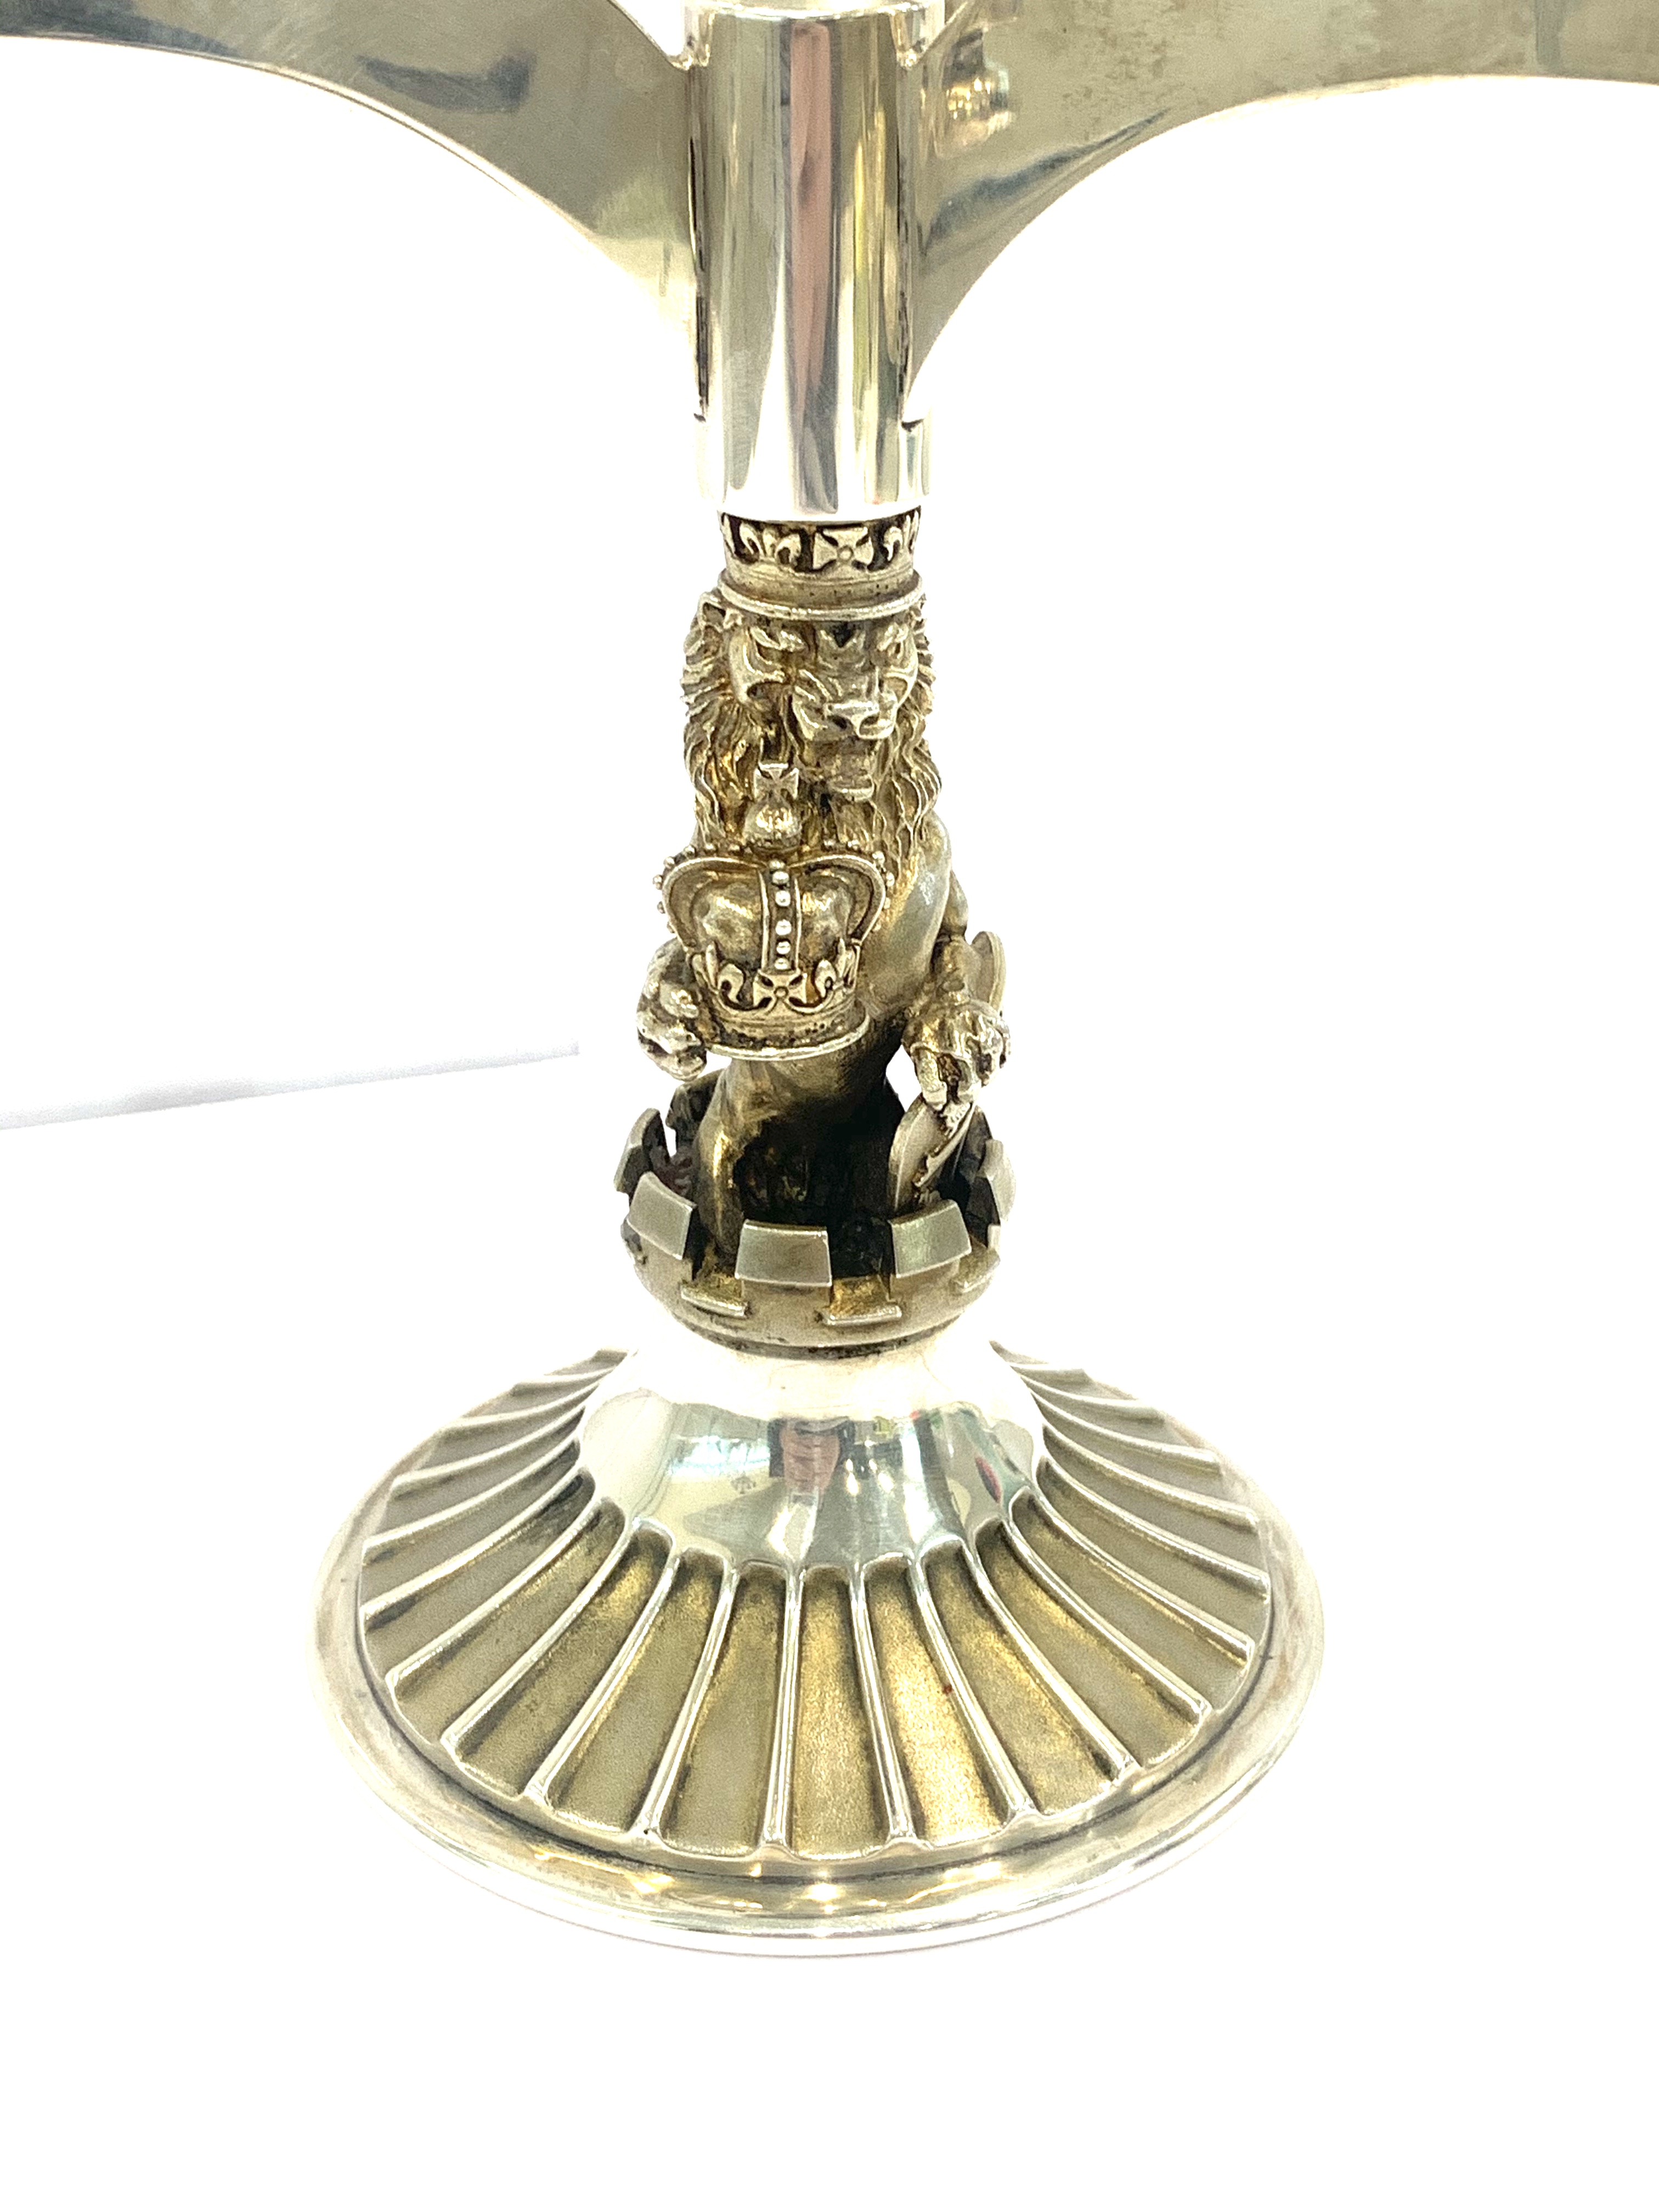 A limited edition Silver Candelabrum produced by Aurum to commemorate the 1977 Royal Silver Jubilee, - Image 5 of 7